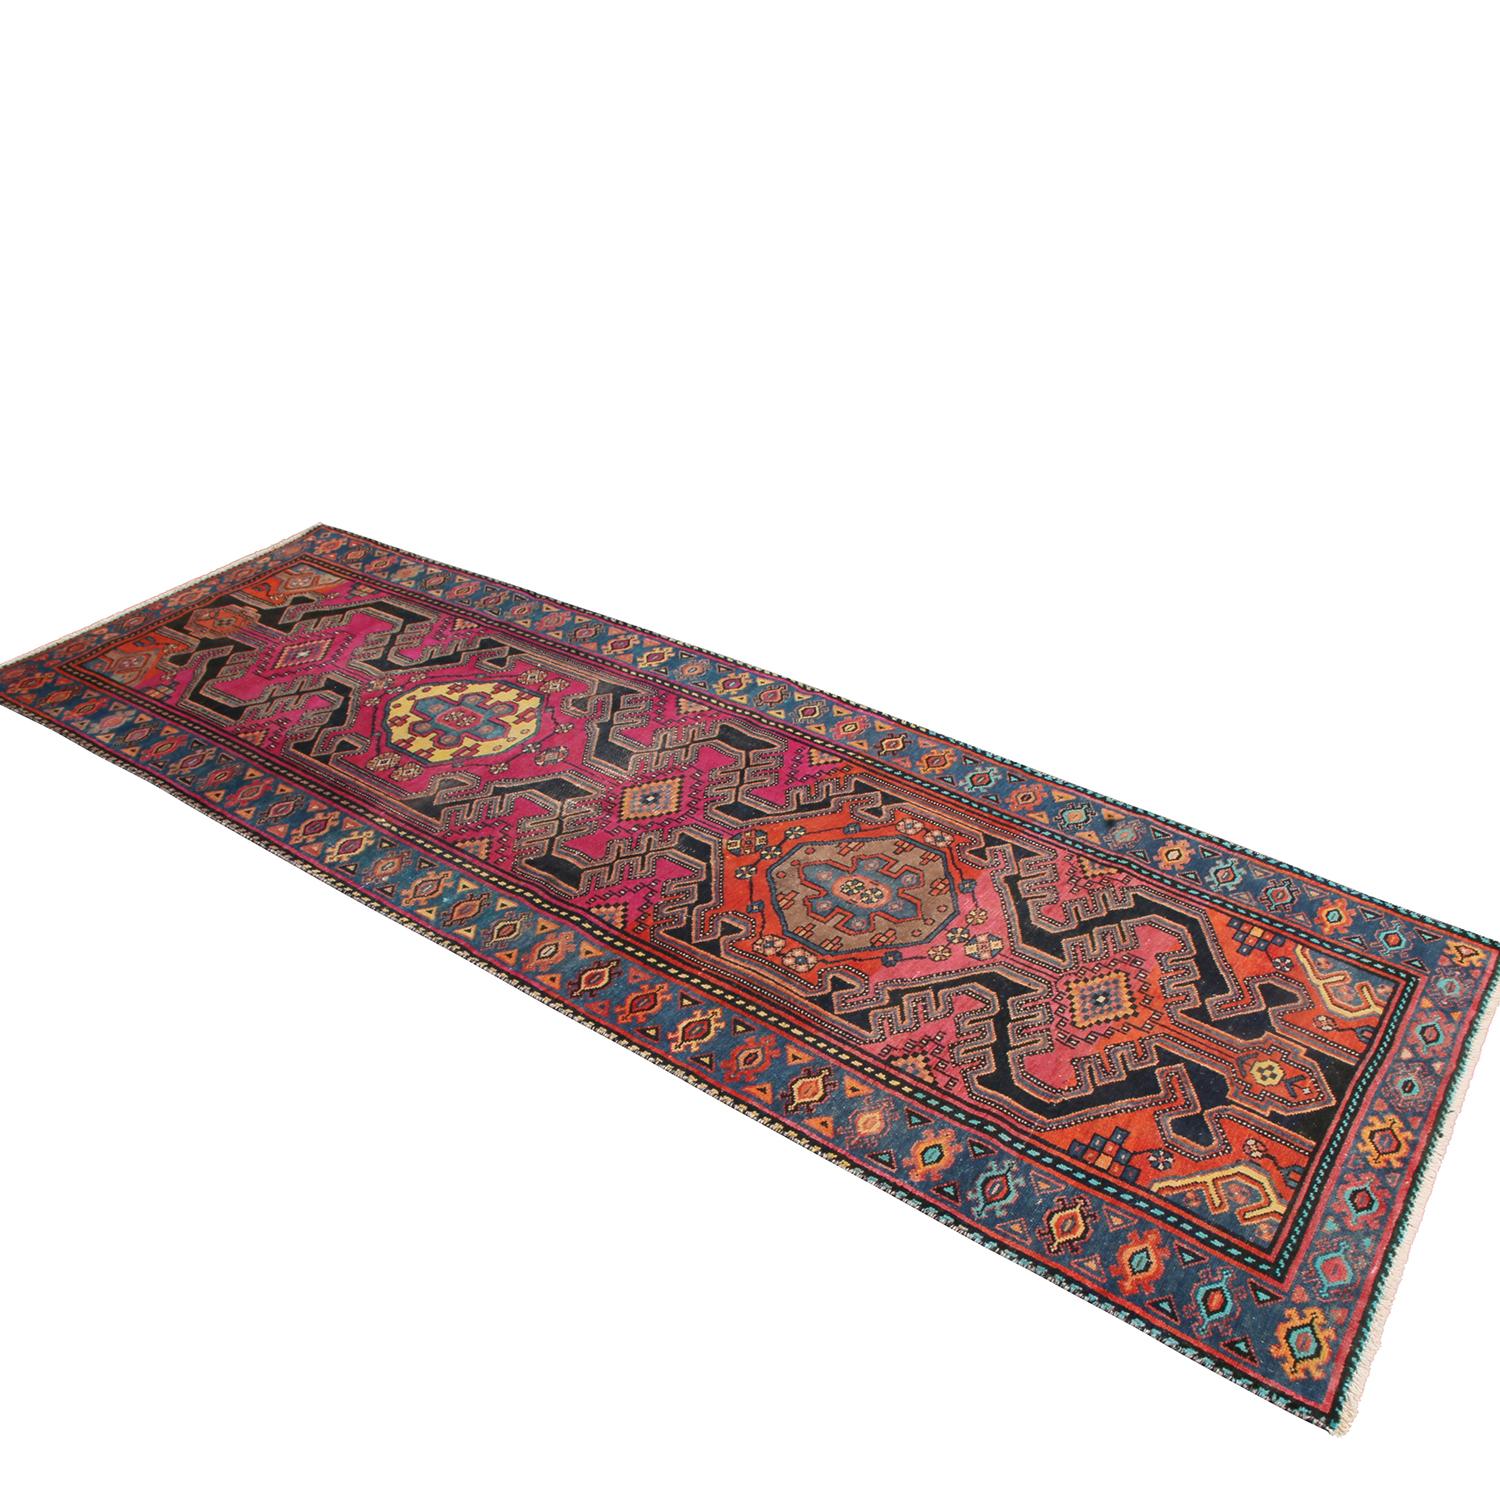 Originating from Pakistan in the 1950s, this vintage Kazak wool runner celebrates a distinct pairing of its navy blue border and background with the vivid magenta and red colorways dressing its field; both complementing the intricate, dimensionally